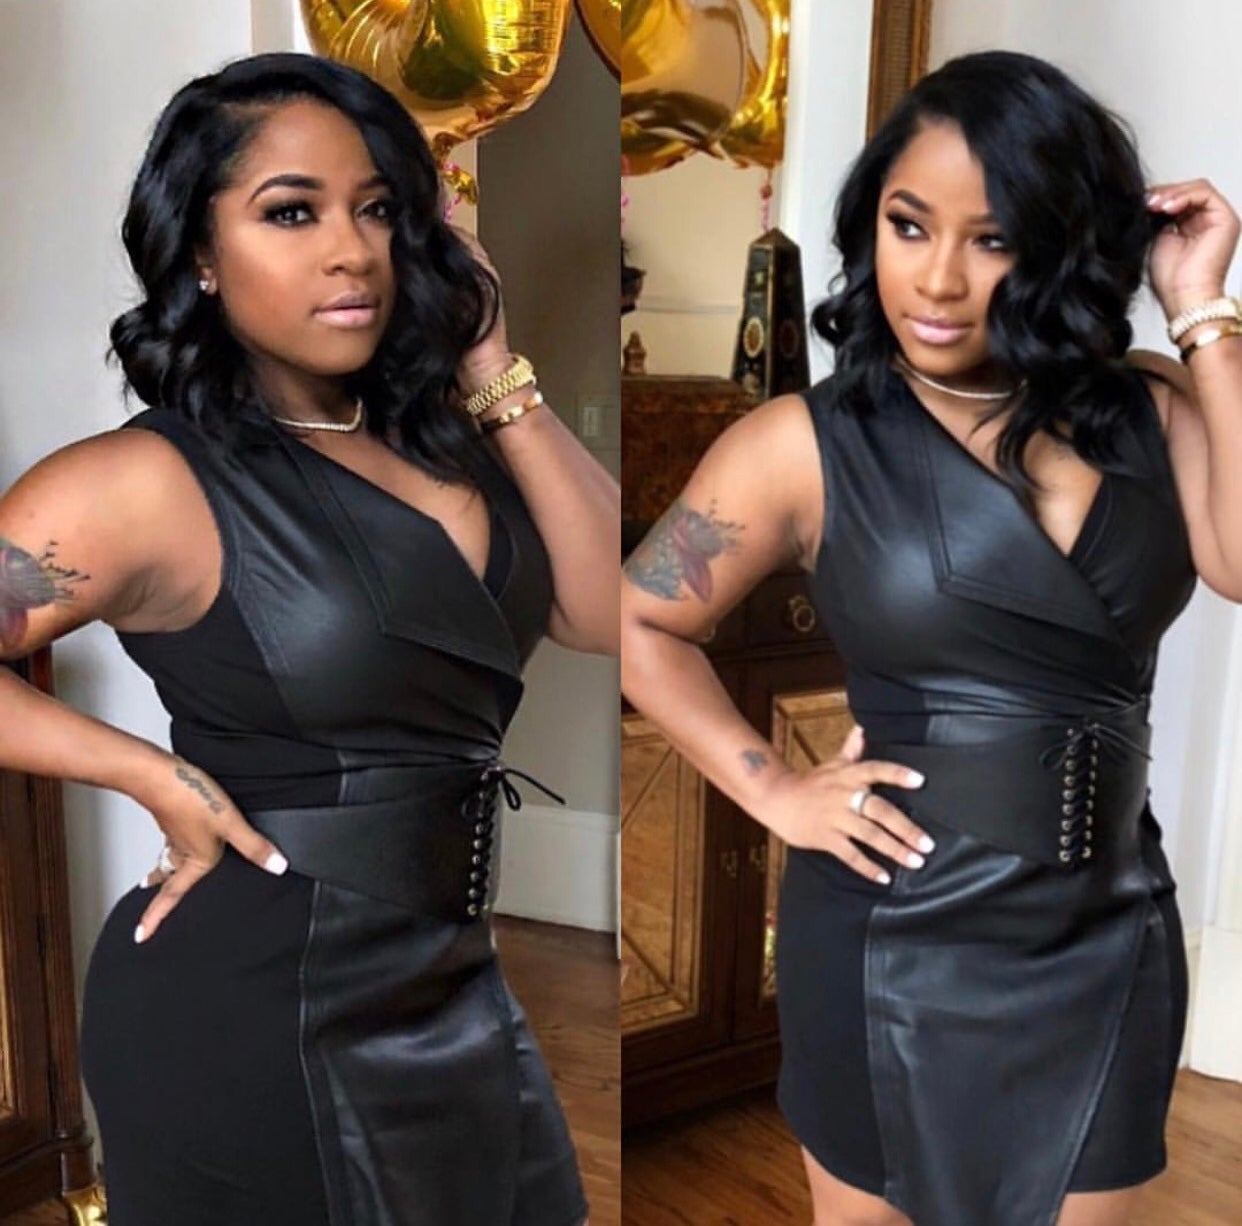 Celebrity Hairstylist Dominique Evans Talks Creating The Perfect Curly Bob For Toya Wright
